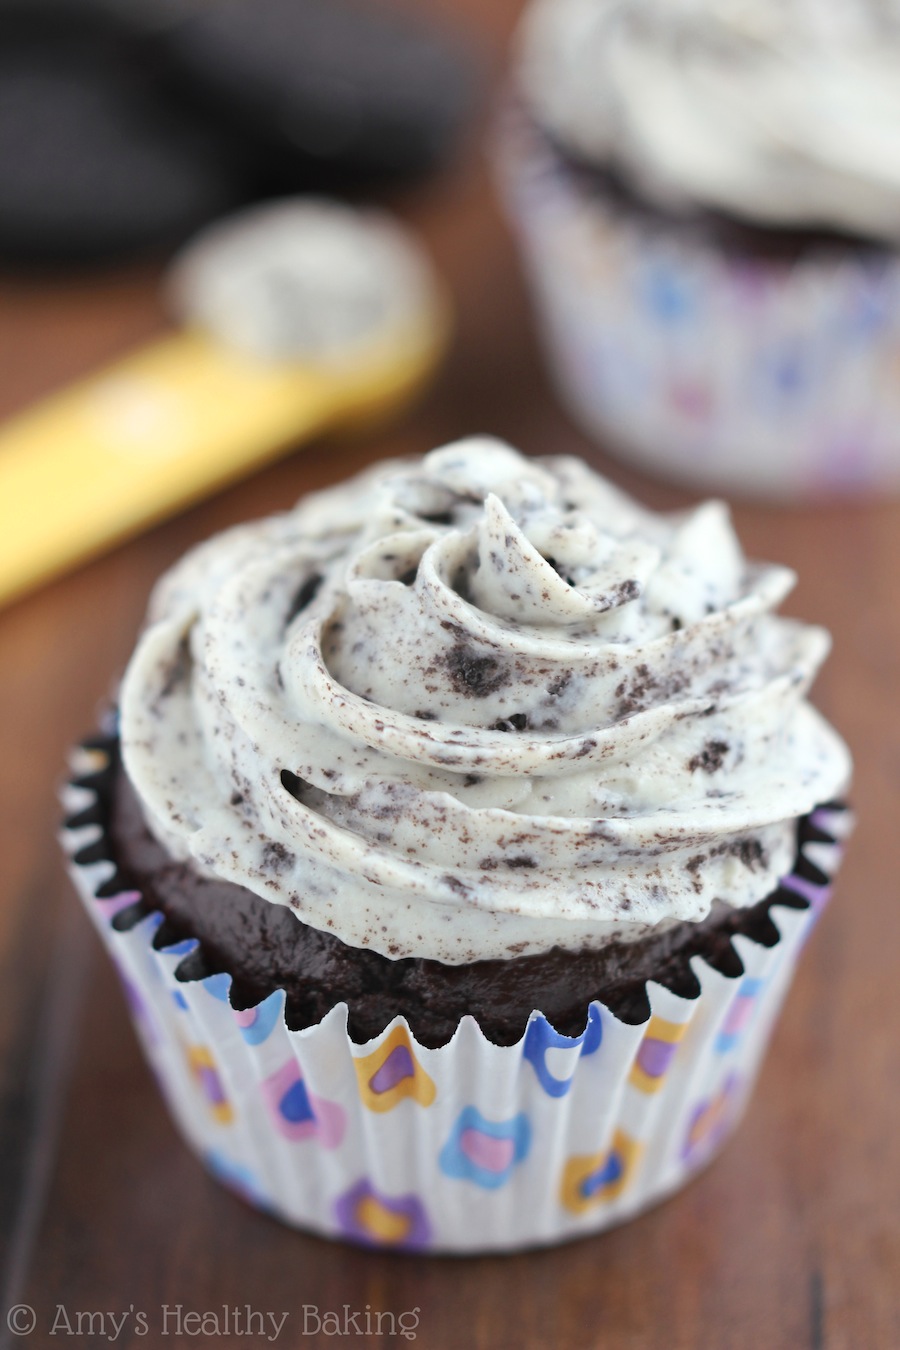 Cookies and Cream Cupcakes with Chocolate Frosting